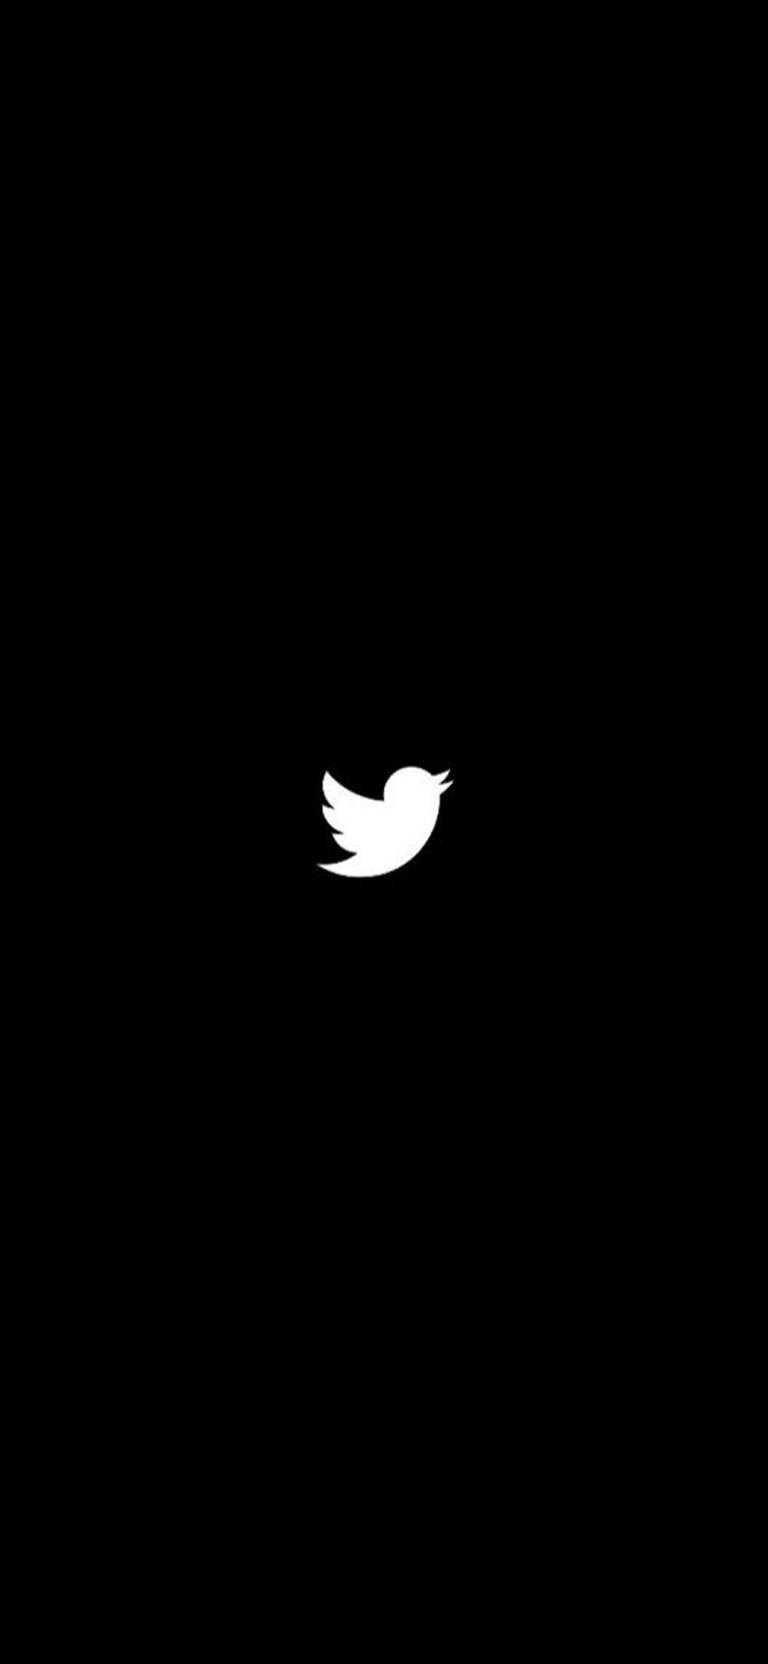 Black And White Twitter Background